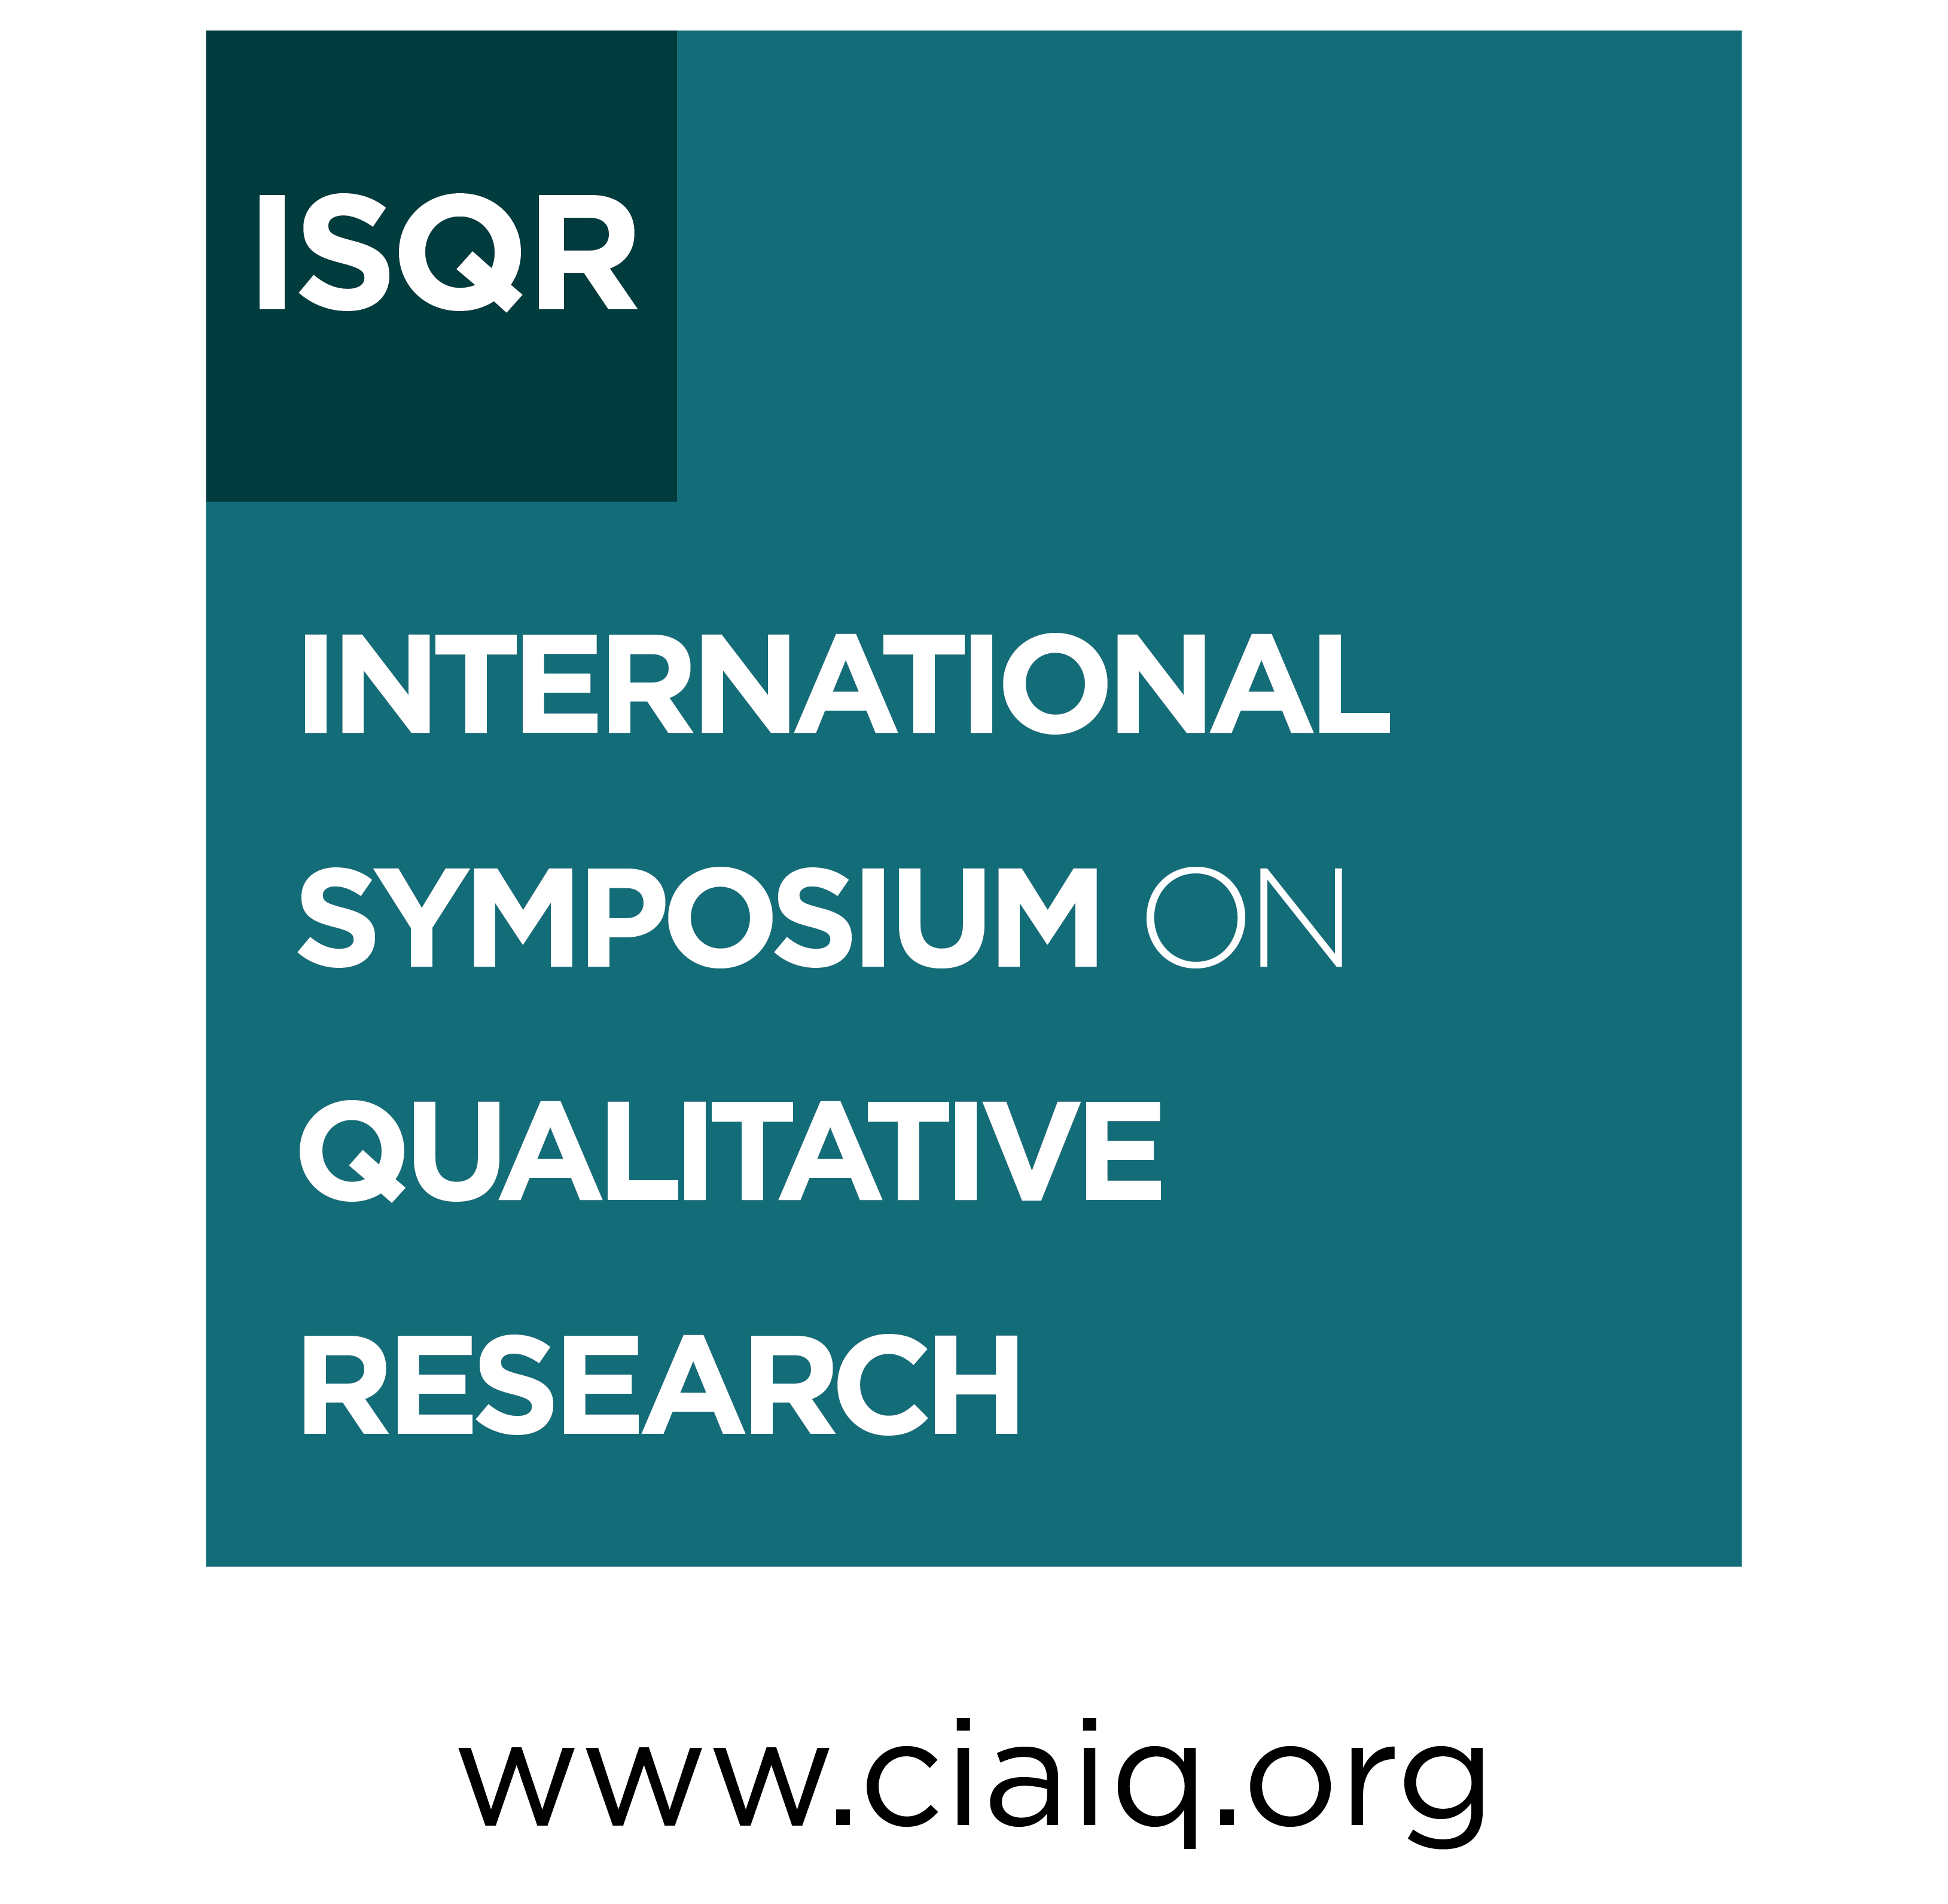 The 2nd International Symposium on Qualitative Research (ISQR2017) will be held in Salamanca on 12 and 13 July 2017 and, in line with previous initiatives, it aims at promoting the presentation and discussion of knowledge, new perspectives, experiences and innovations in the field of Qualitative Research.